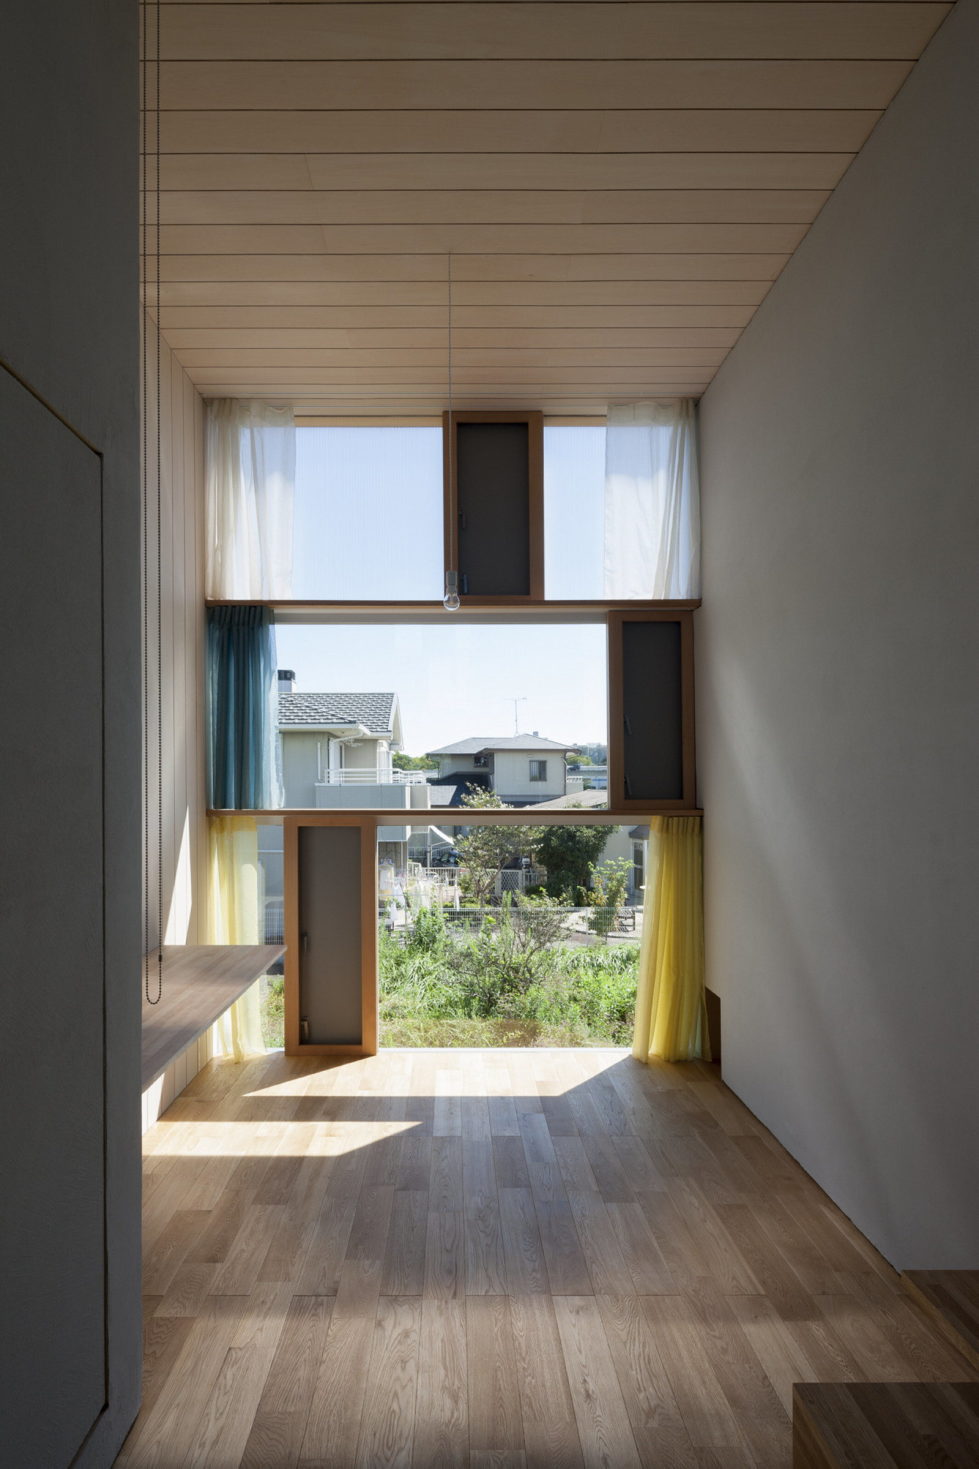 The family idyll in Japan from the Ihrmk studio 3